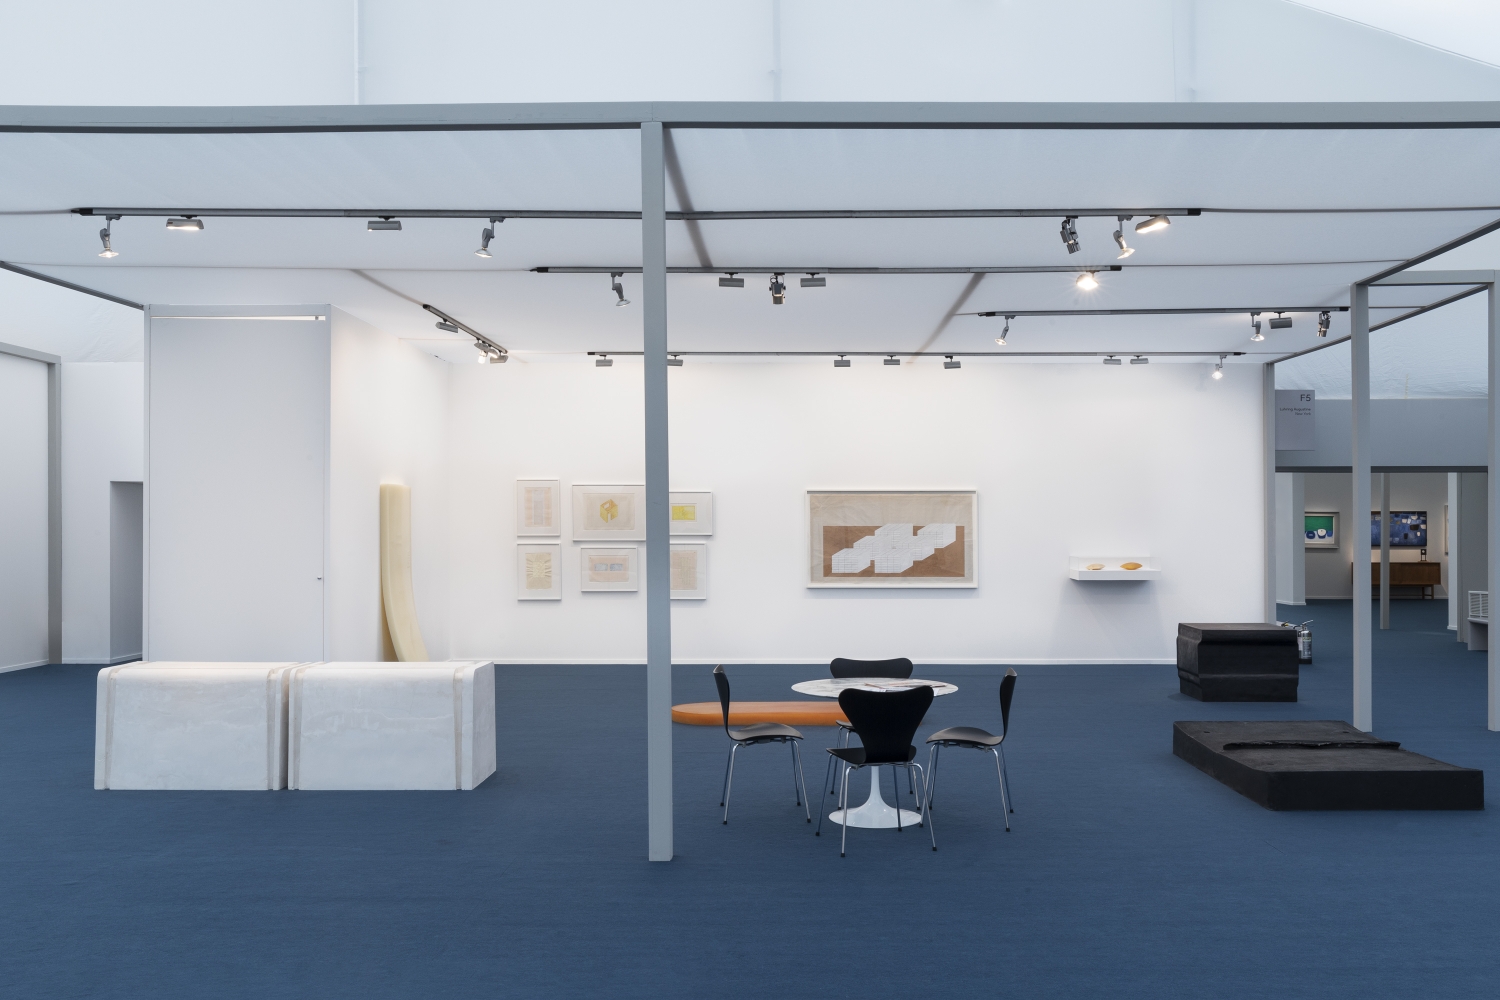 Luhring Augustine

Frieze Masters, Stand F05

Installation view

2019